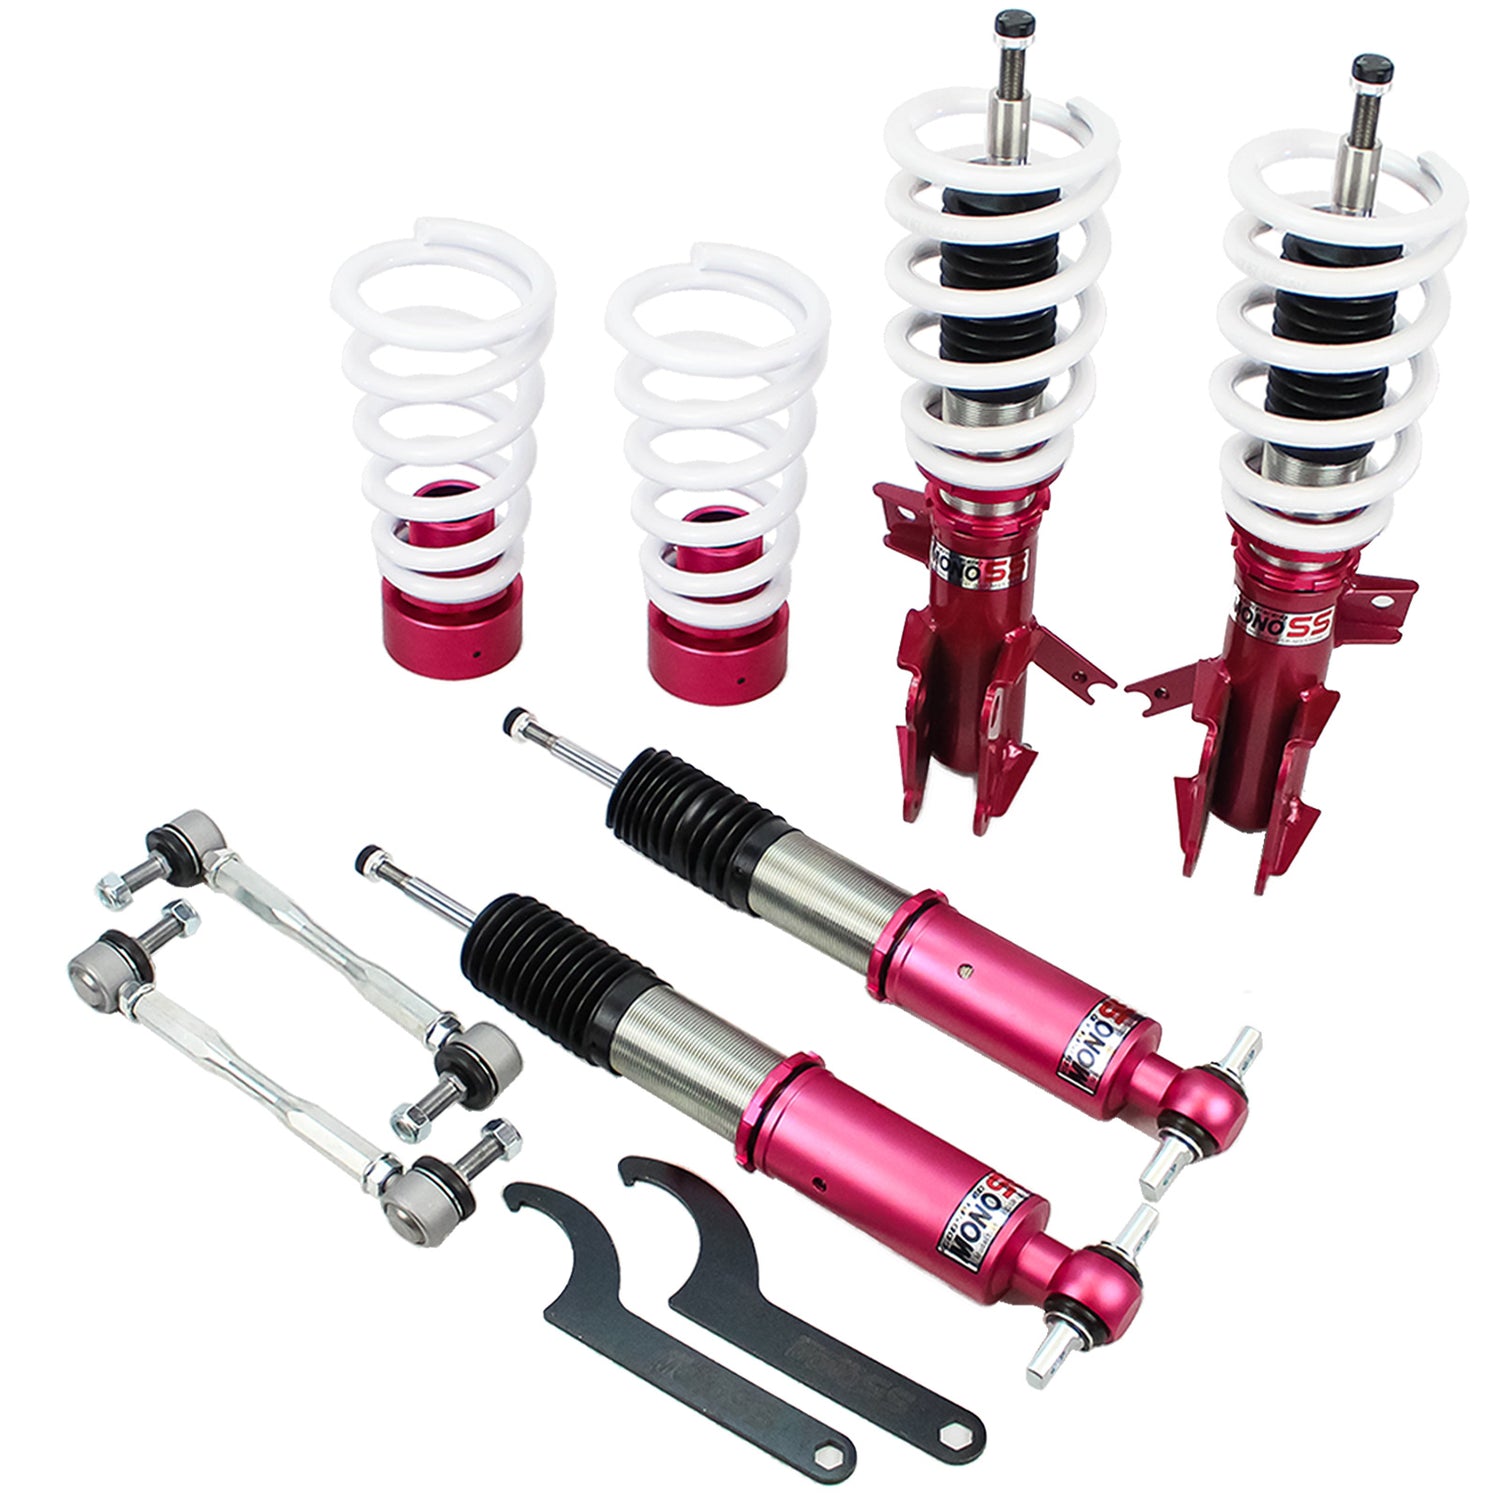 Godspeed MSS1096 MonoSS Coilover Lowering Kit, Fully Adjustable, Ride Height, Spring Tension And 16 Click Damping, Ford Fusion 2013-17